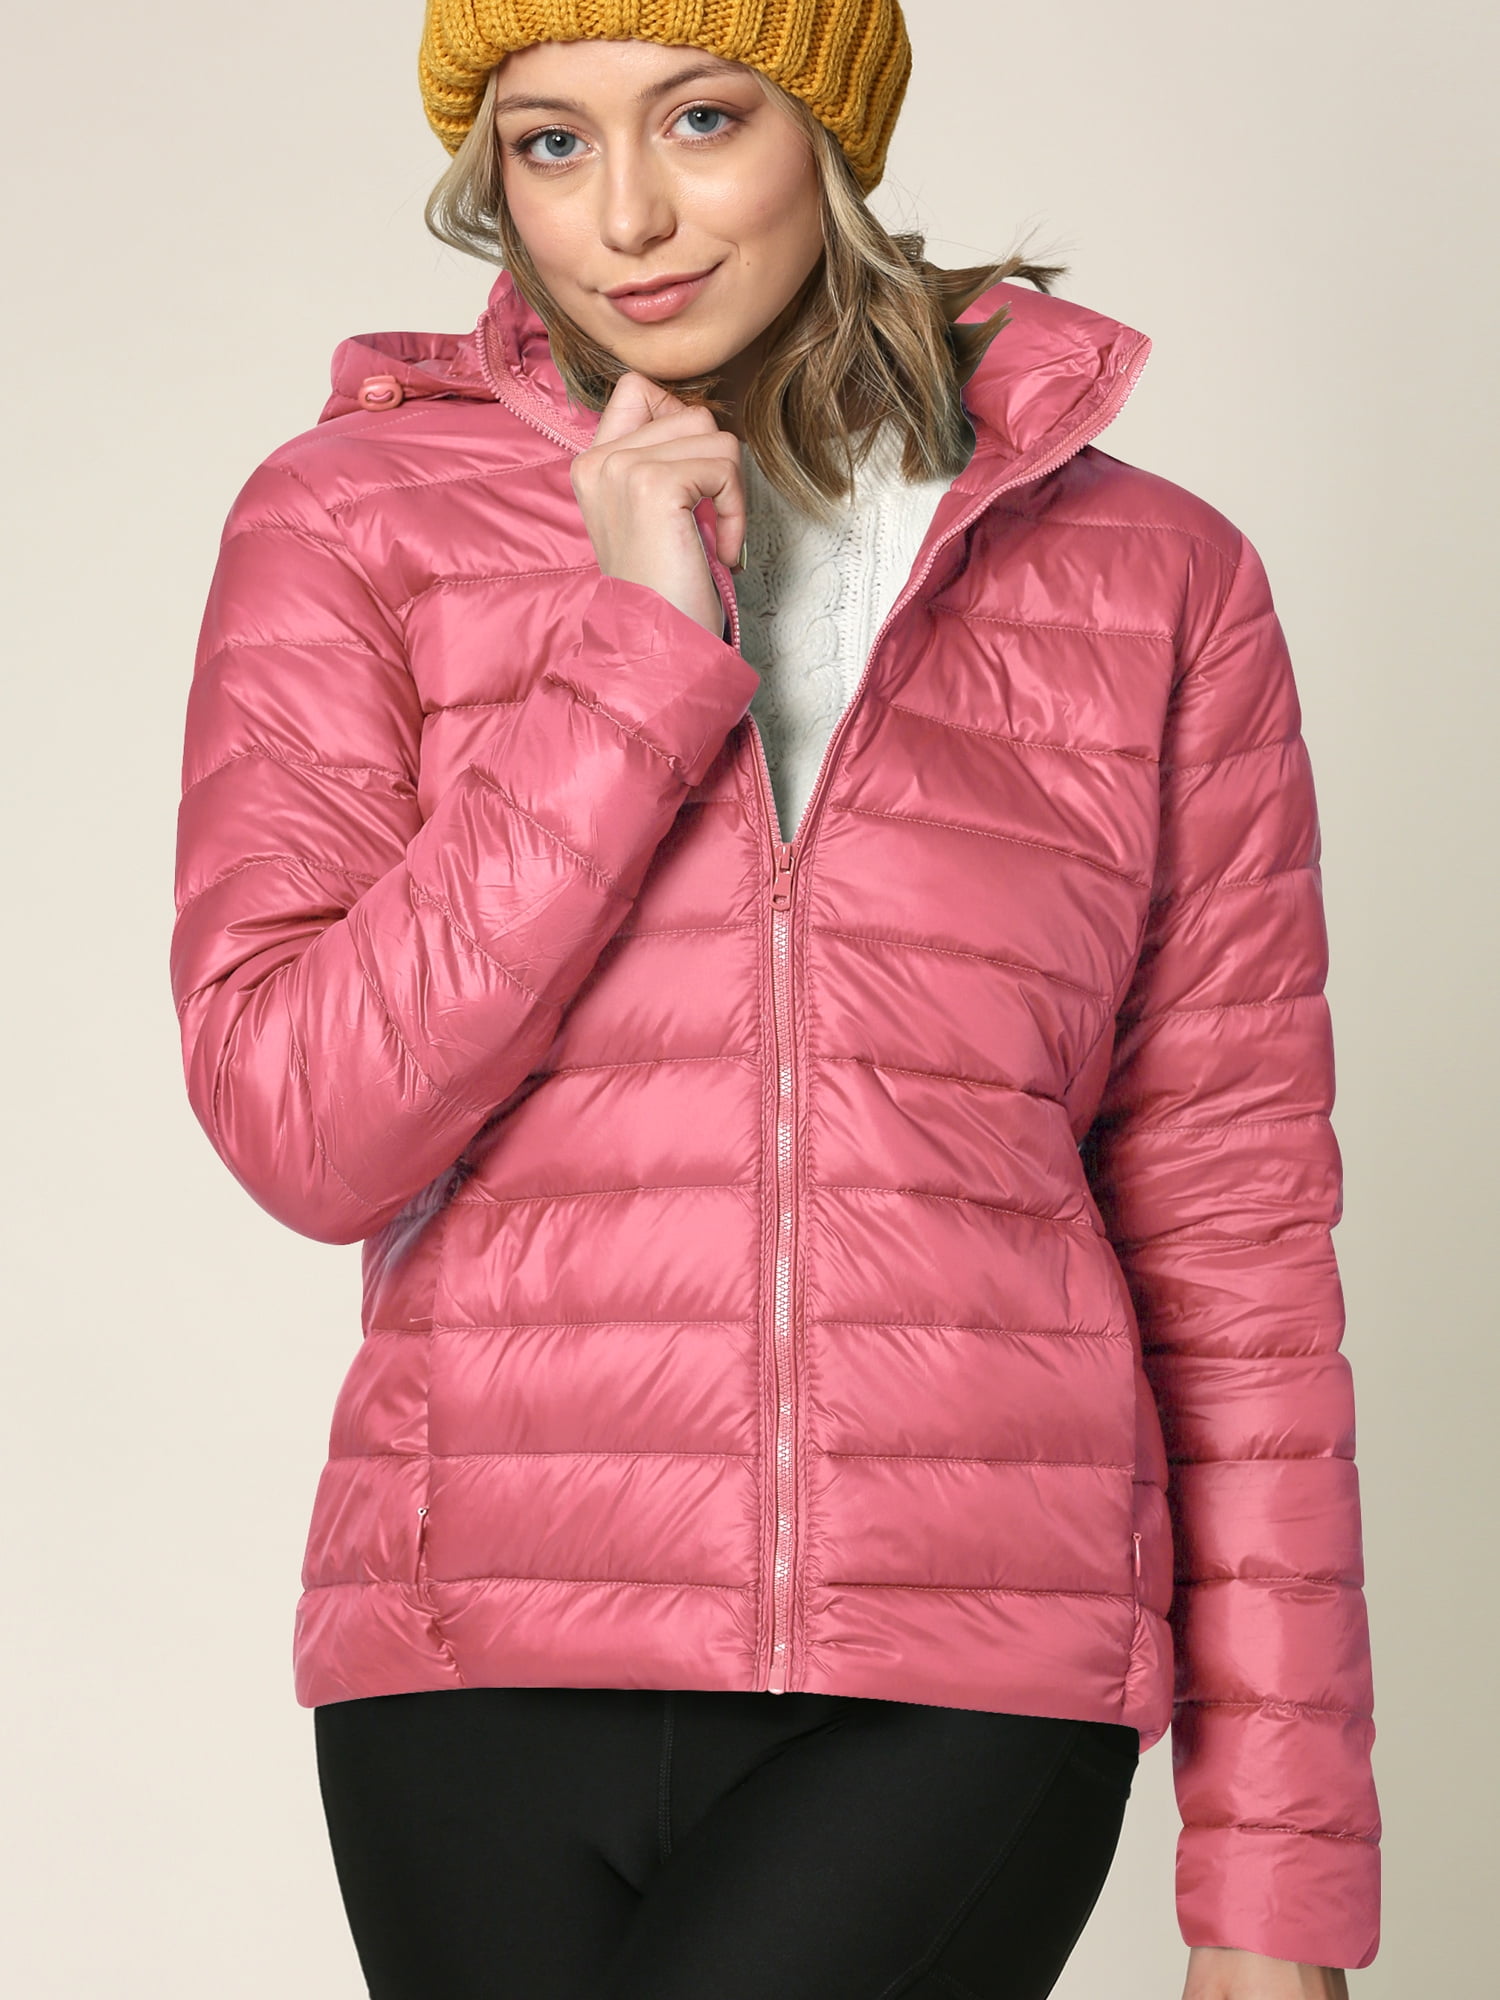 Made Women's Ultra Light Weight Packable Down Jacket with Removable Hoodie S MAUVE - Walmart.com